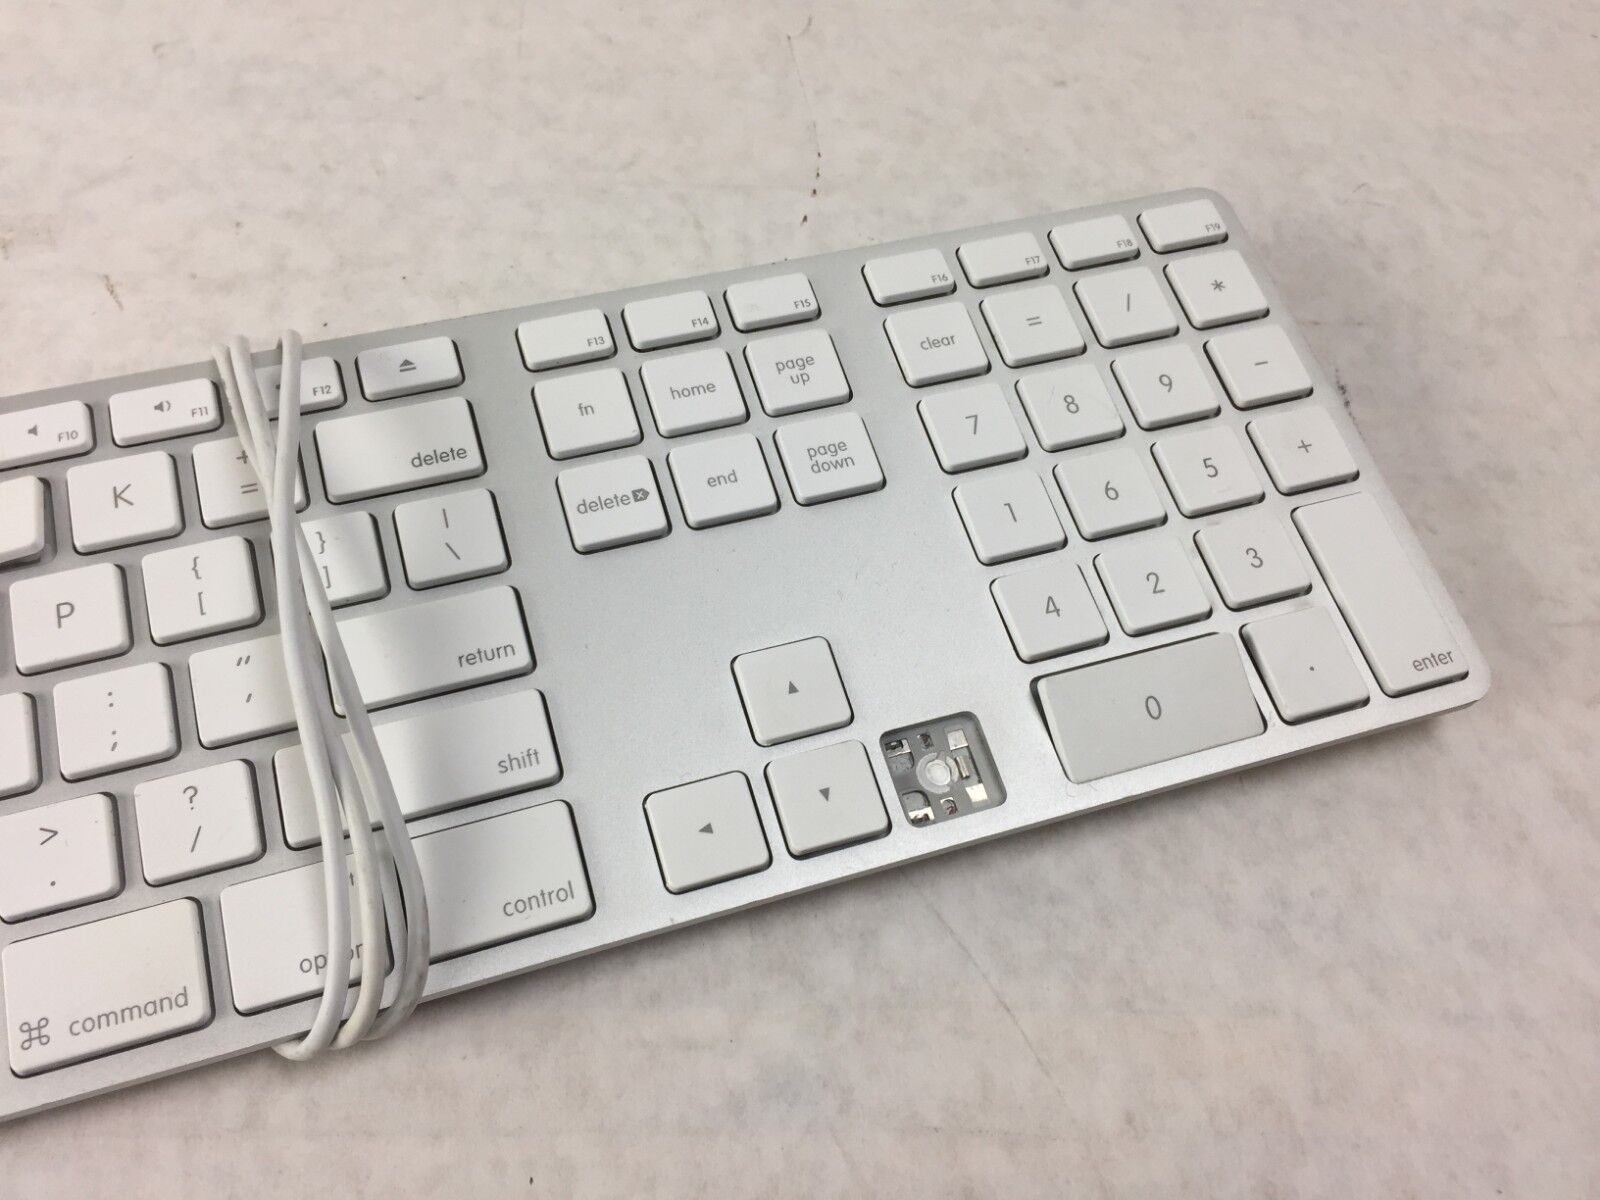 Apple A1243 MB110LL/A Wired Keyboard, Numeric Keypad A1243 Parts/Repair Lot (15)